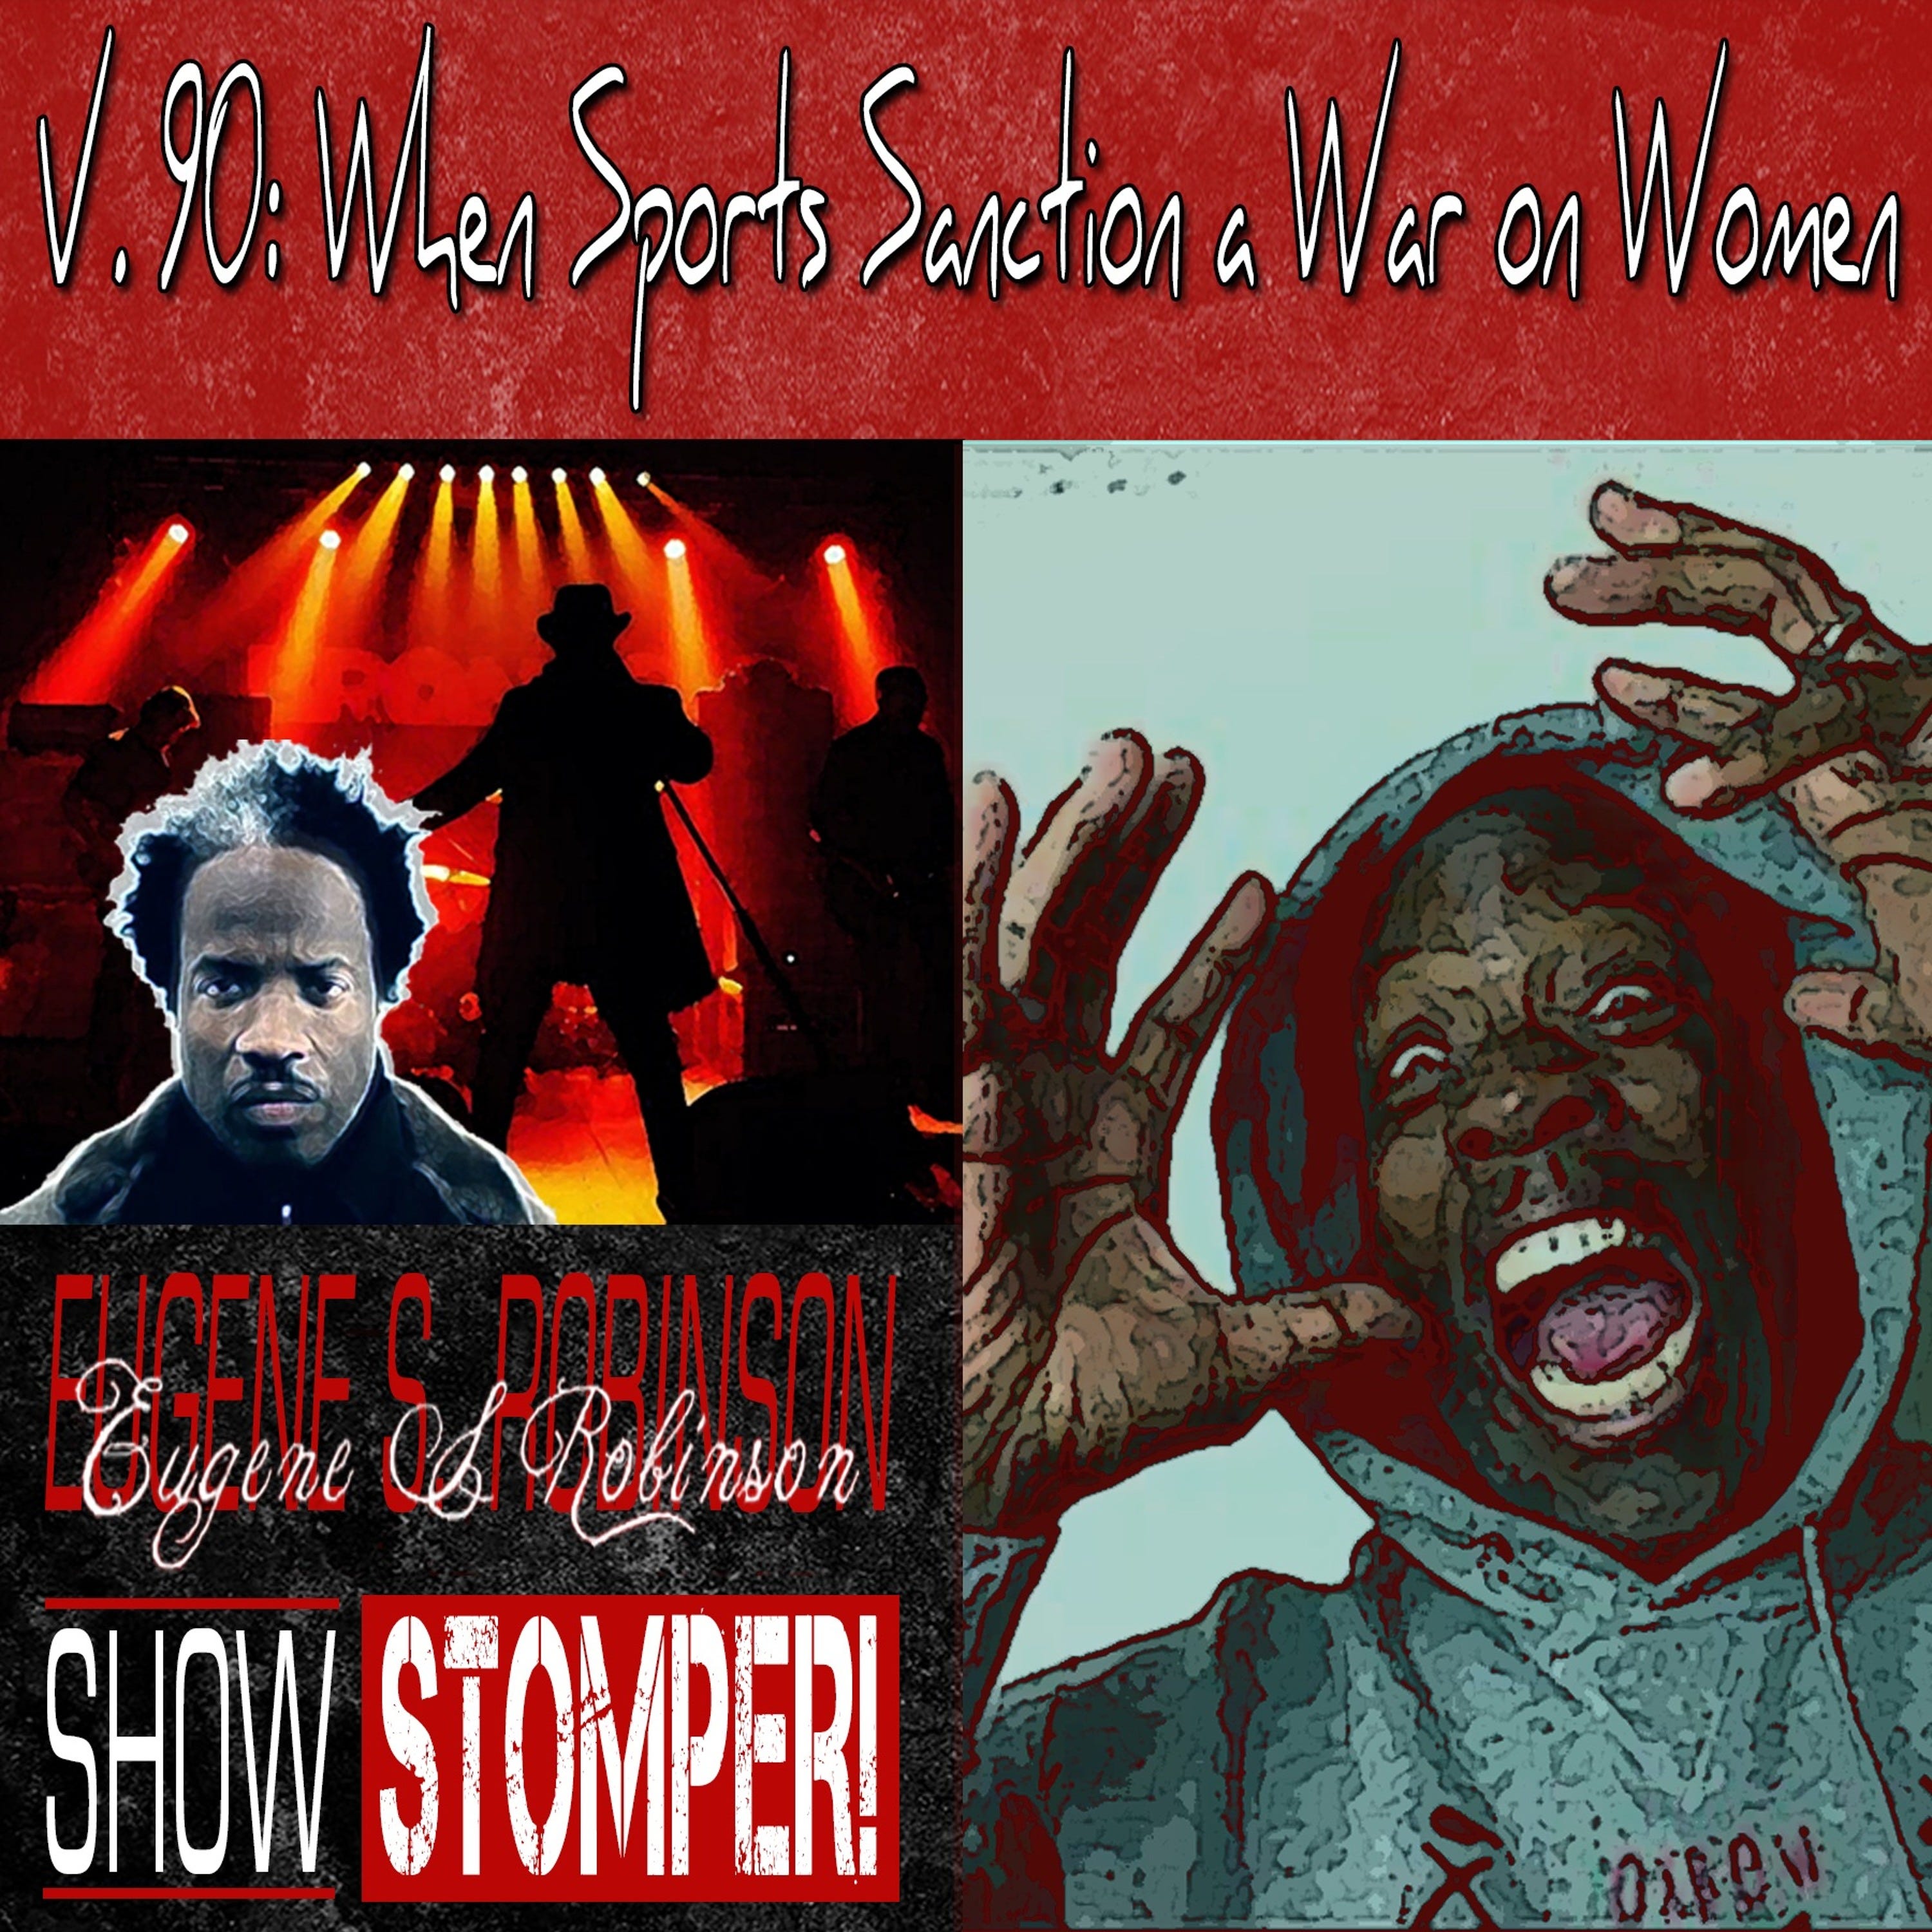 V. 90 When Sports Sanction A War On Women On The Eugene S. Robinson Show Stomper!